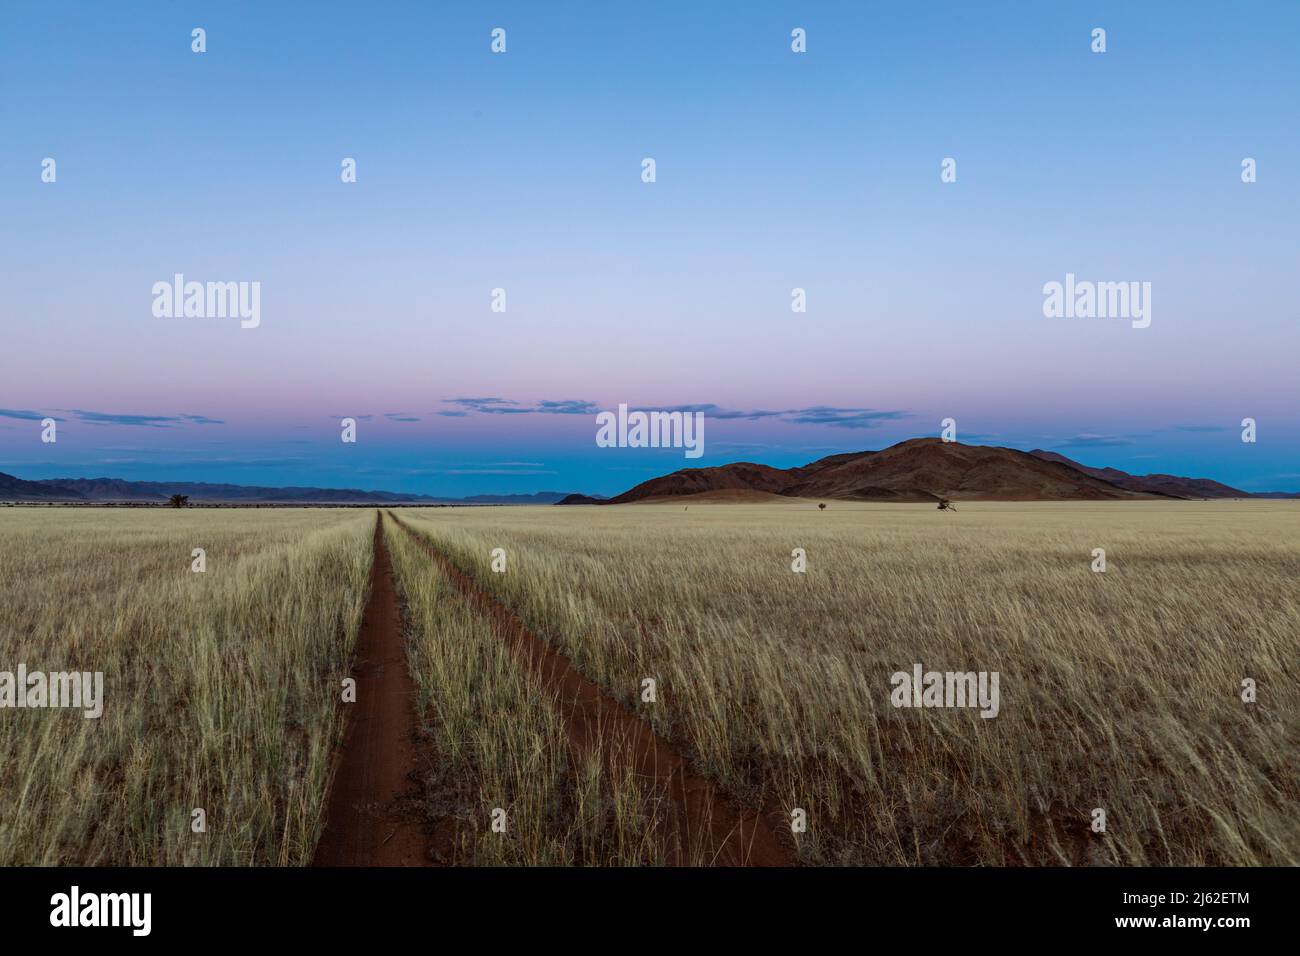 Tweespoorpaadjie in dry grass to the blue sky after sunset Namib Desert Namibia Stock Photo